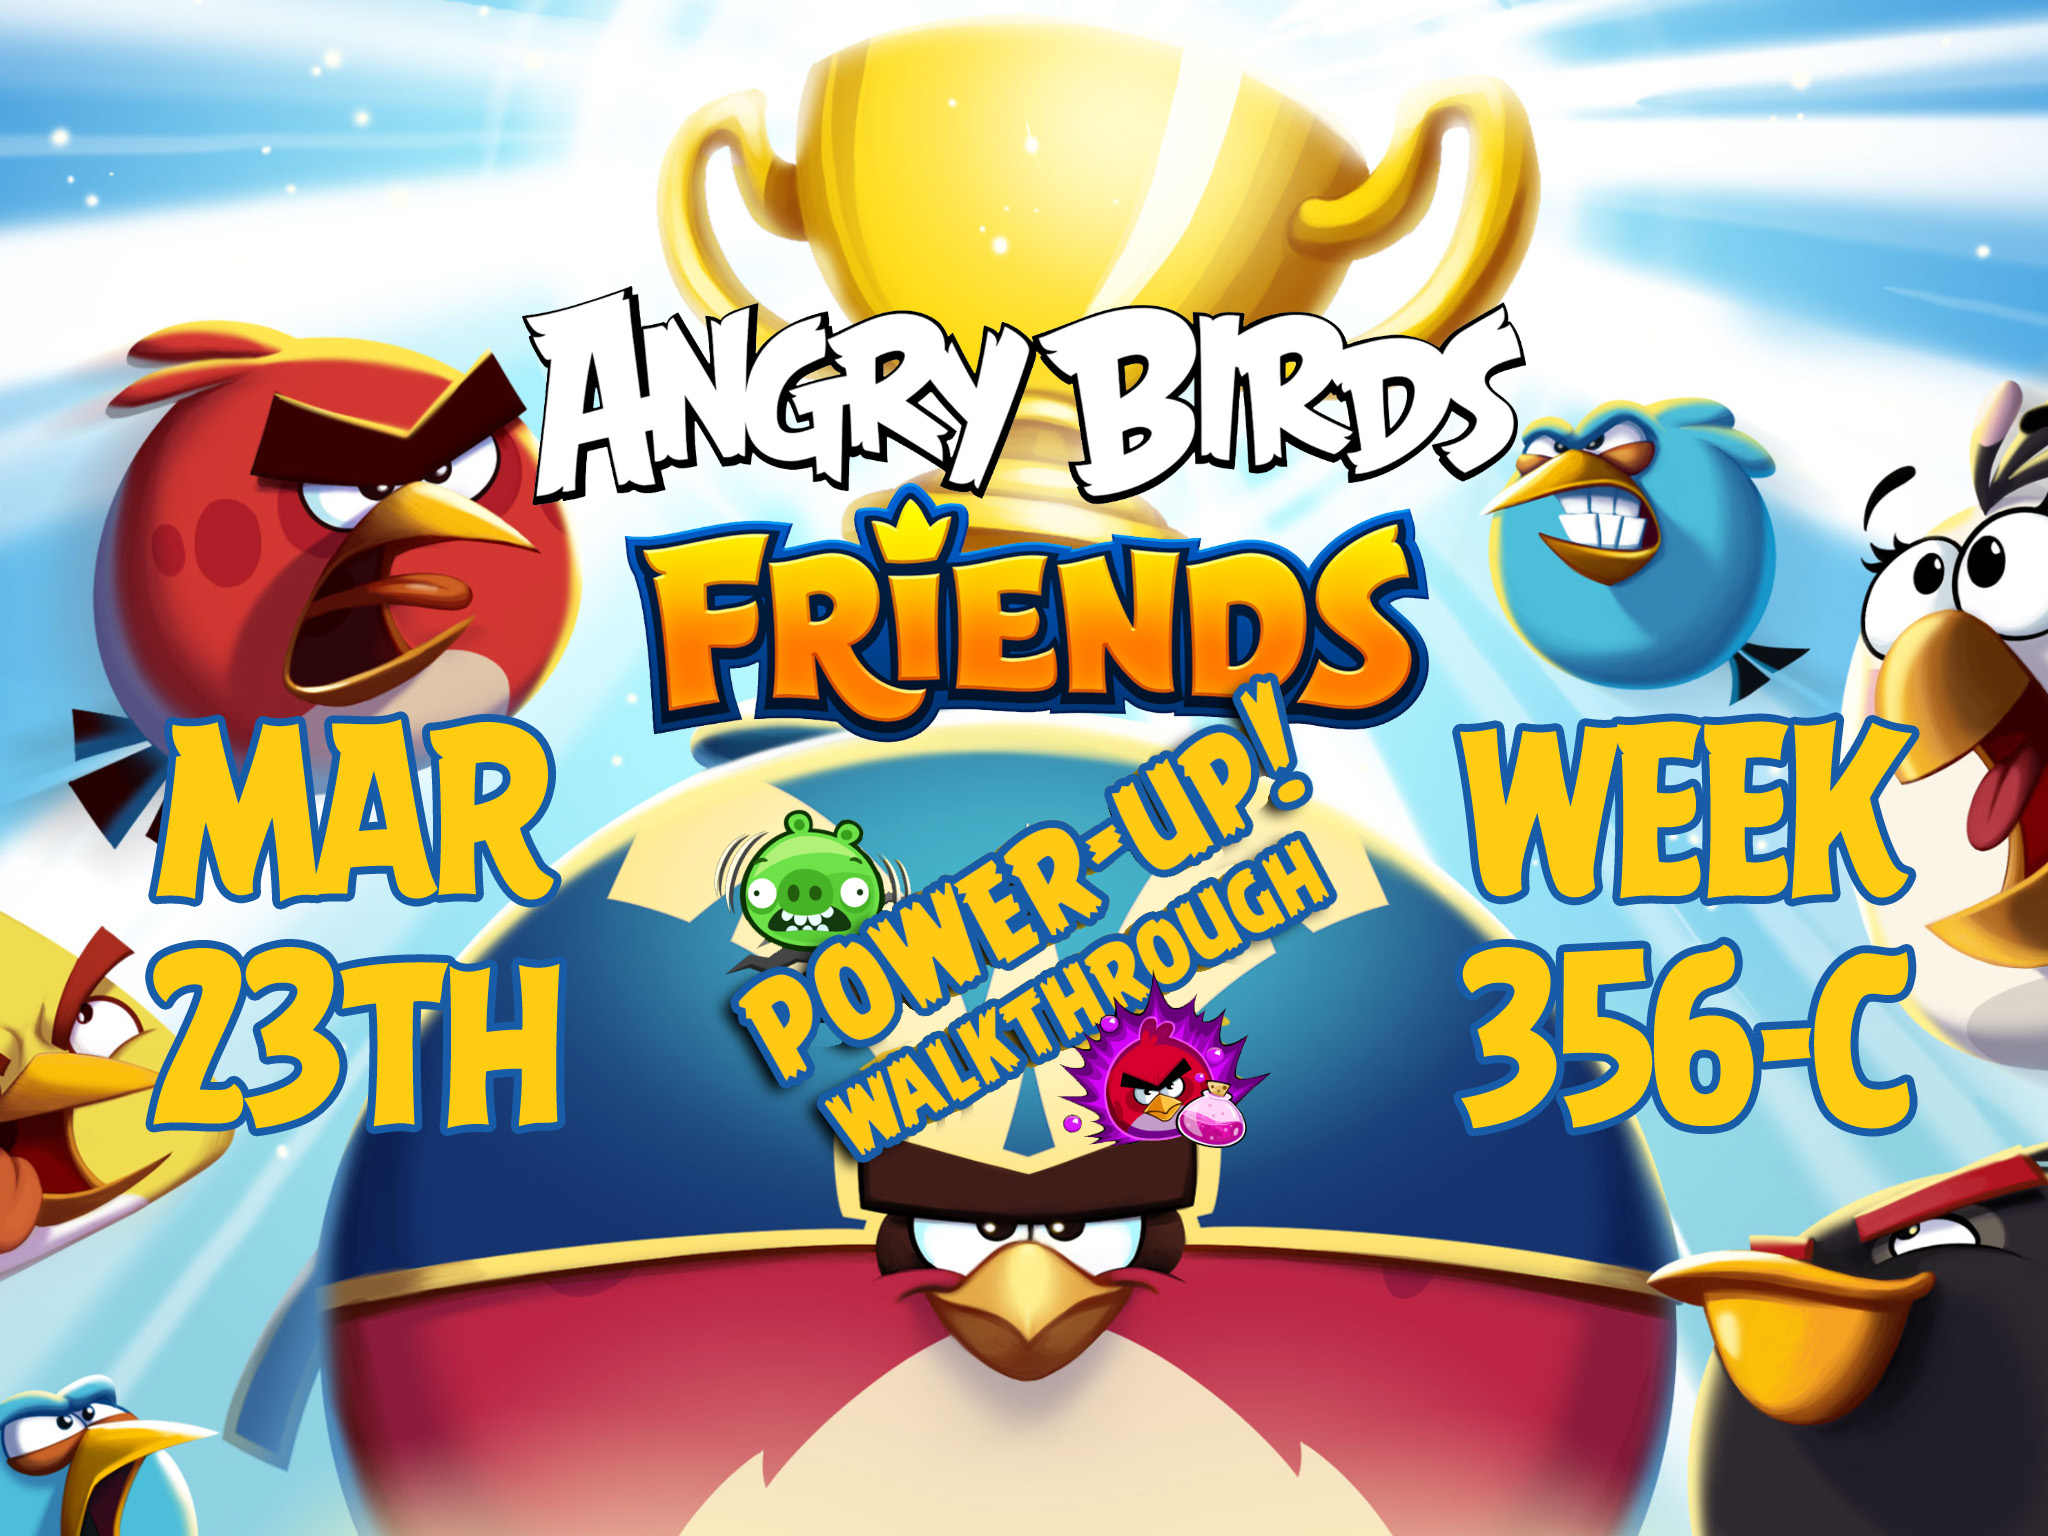 Angry-Birds-Friends-Tournament-Week-356-C-Feature-Image-PU